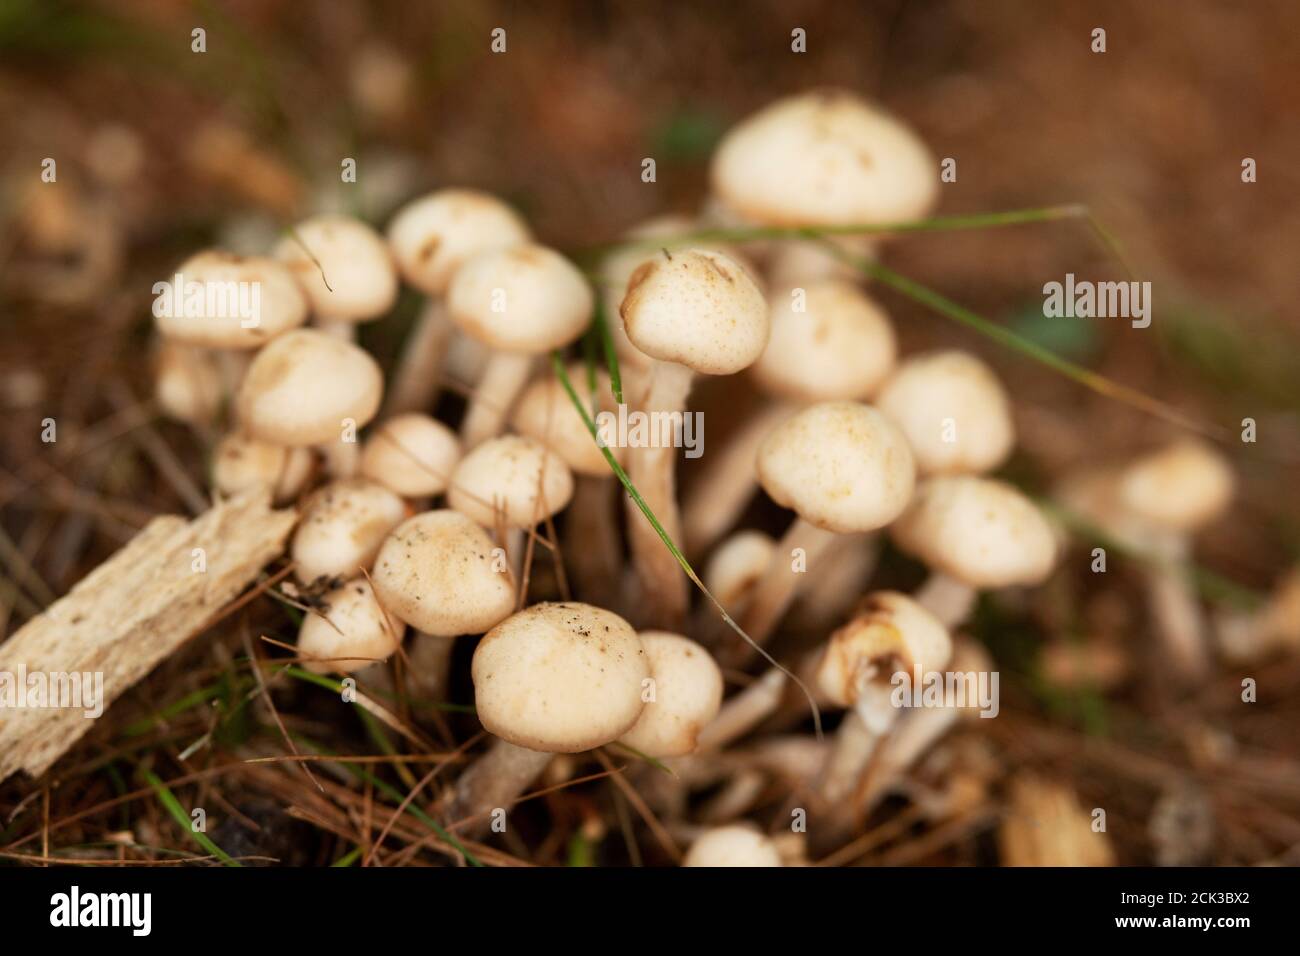 Trooping crumble cap (Coprinellus disseminatus), also known as fairy inkcap, a species of agaric fungus in family Psathyrellaceae. Stock Photo